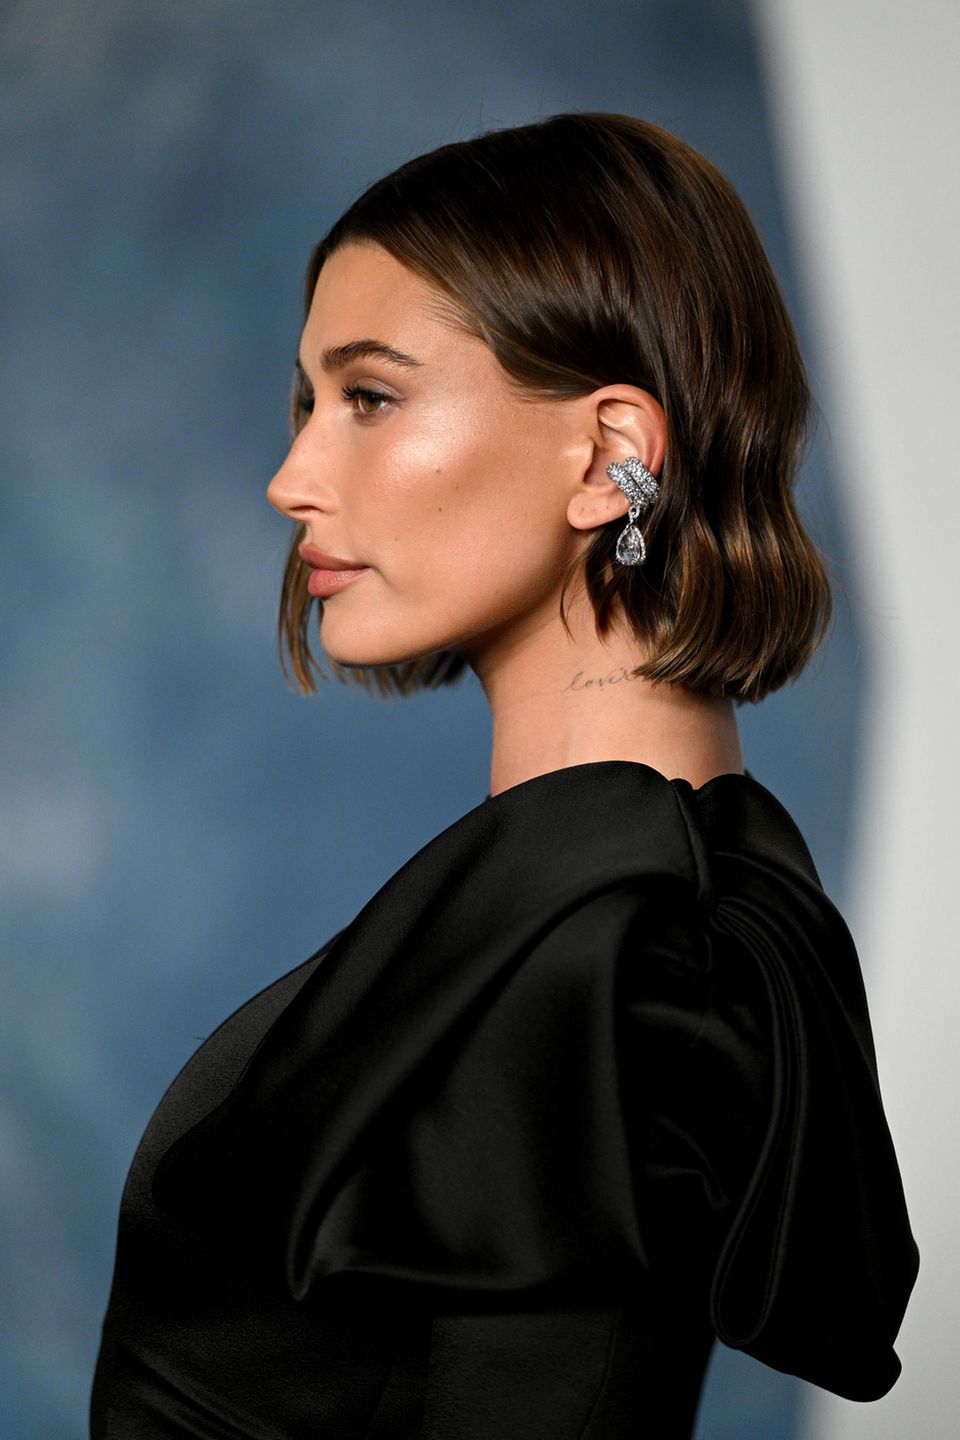 It girl Hailey Bieber adorns herself with two XXL ear cuffs in the trend color silver for Oscar night.